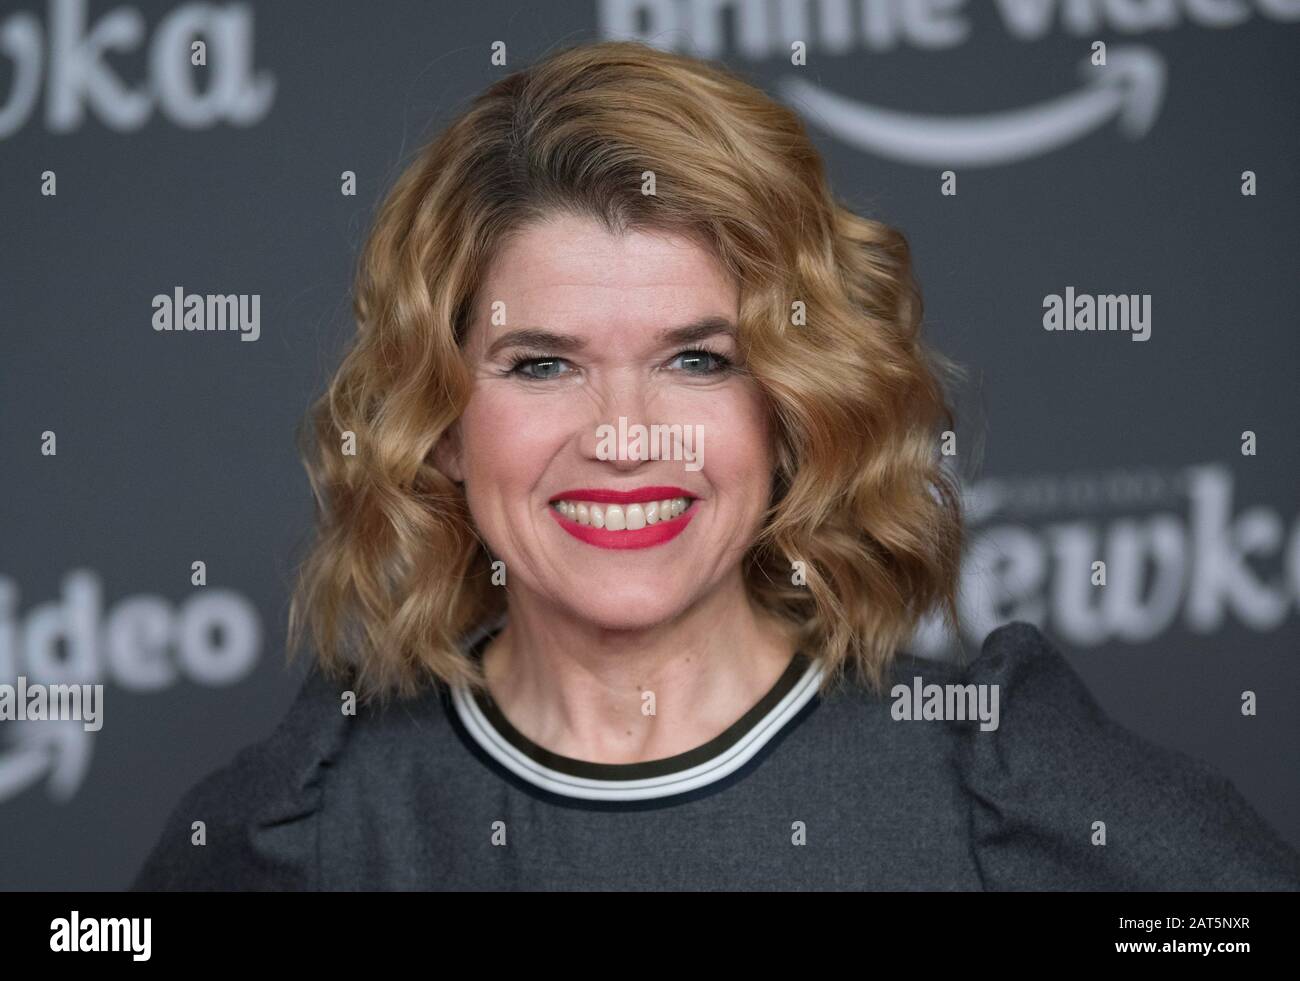 30 January 2020, Berlin: The actress Anke Engelke comes to the premiere of  the 10th season